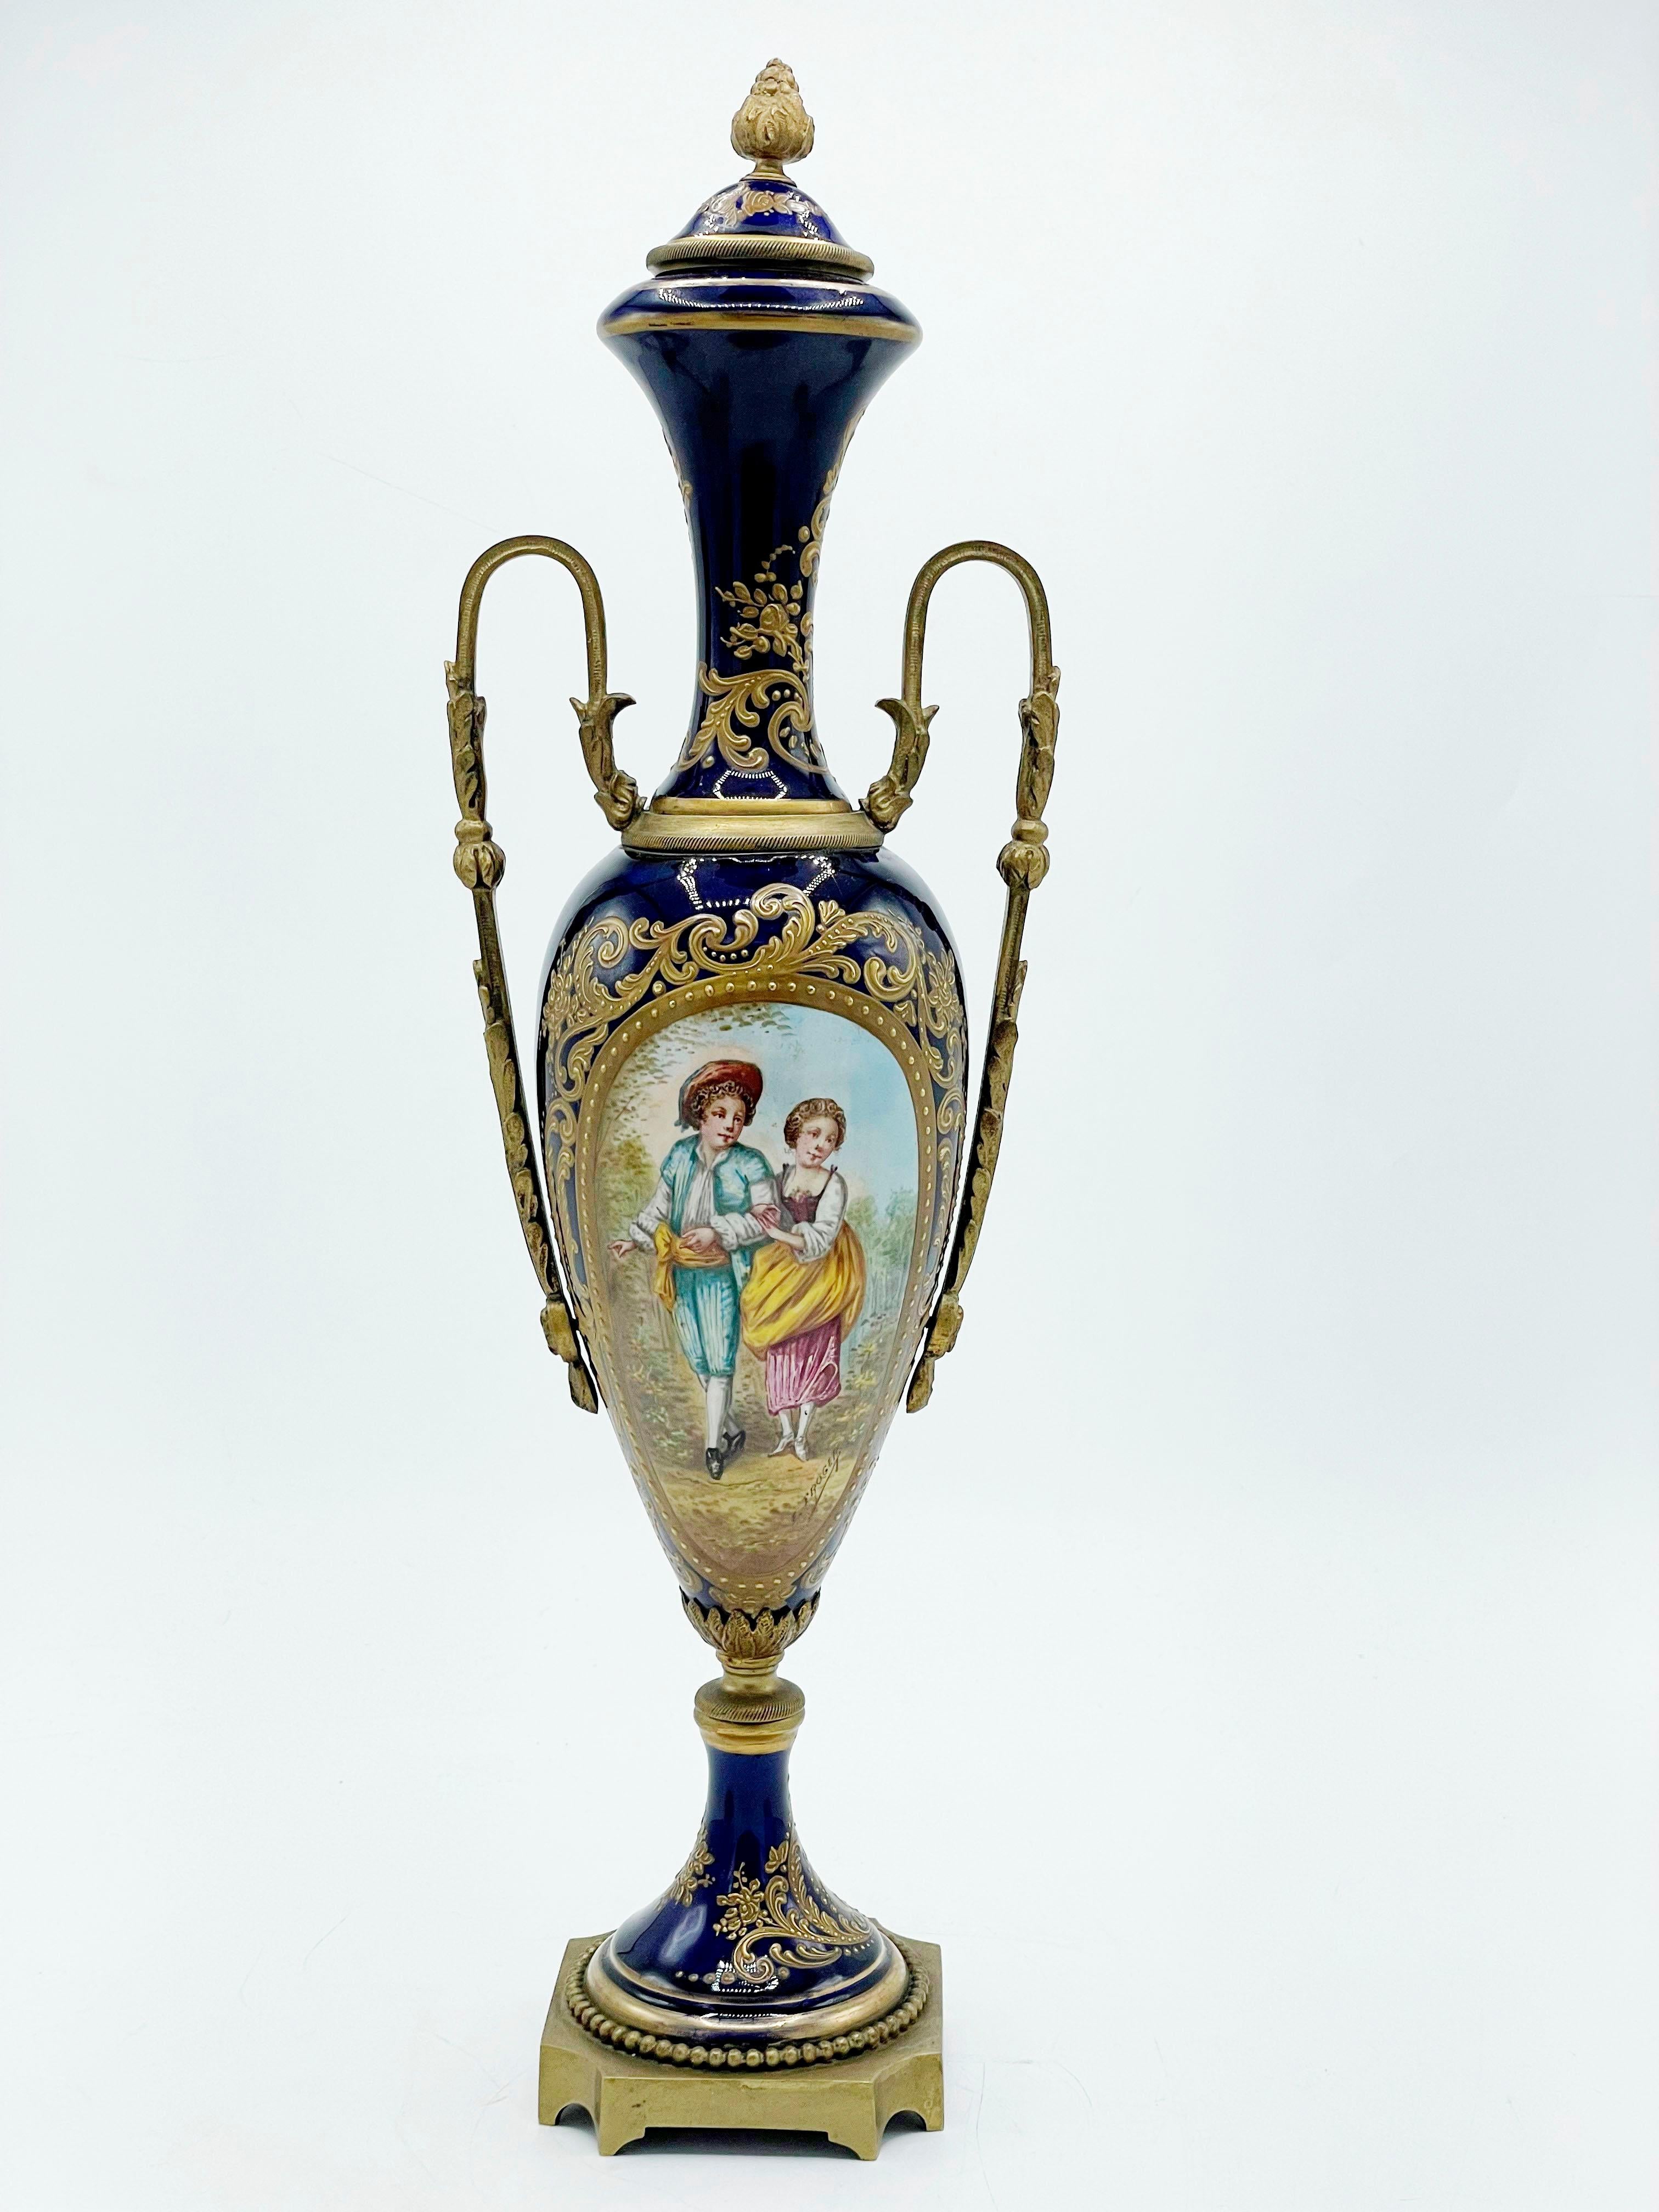 French porcelain vase, Sevres, with Cloisonne bronze
French porcelain vase with gilt base, with gilt bronze handles with a painted landscape on one side and a couple of children inside gilt cartouches, signed 